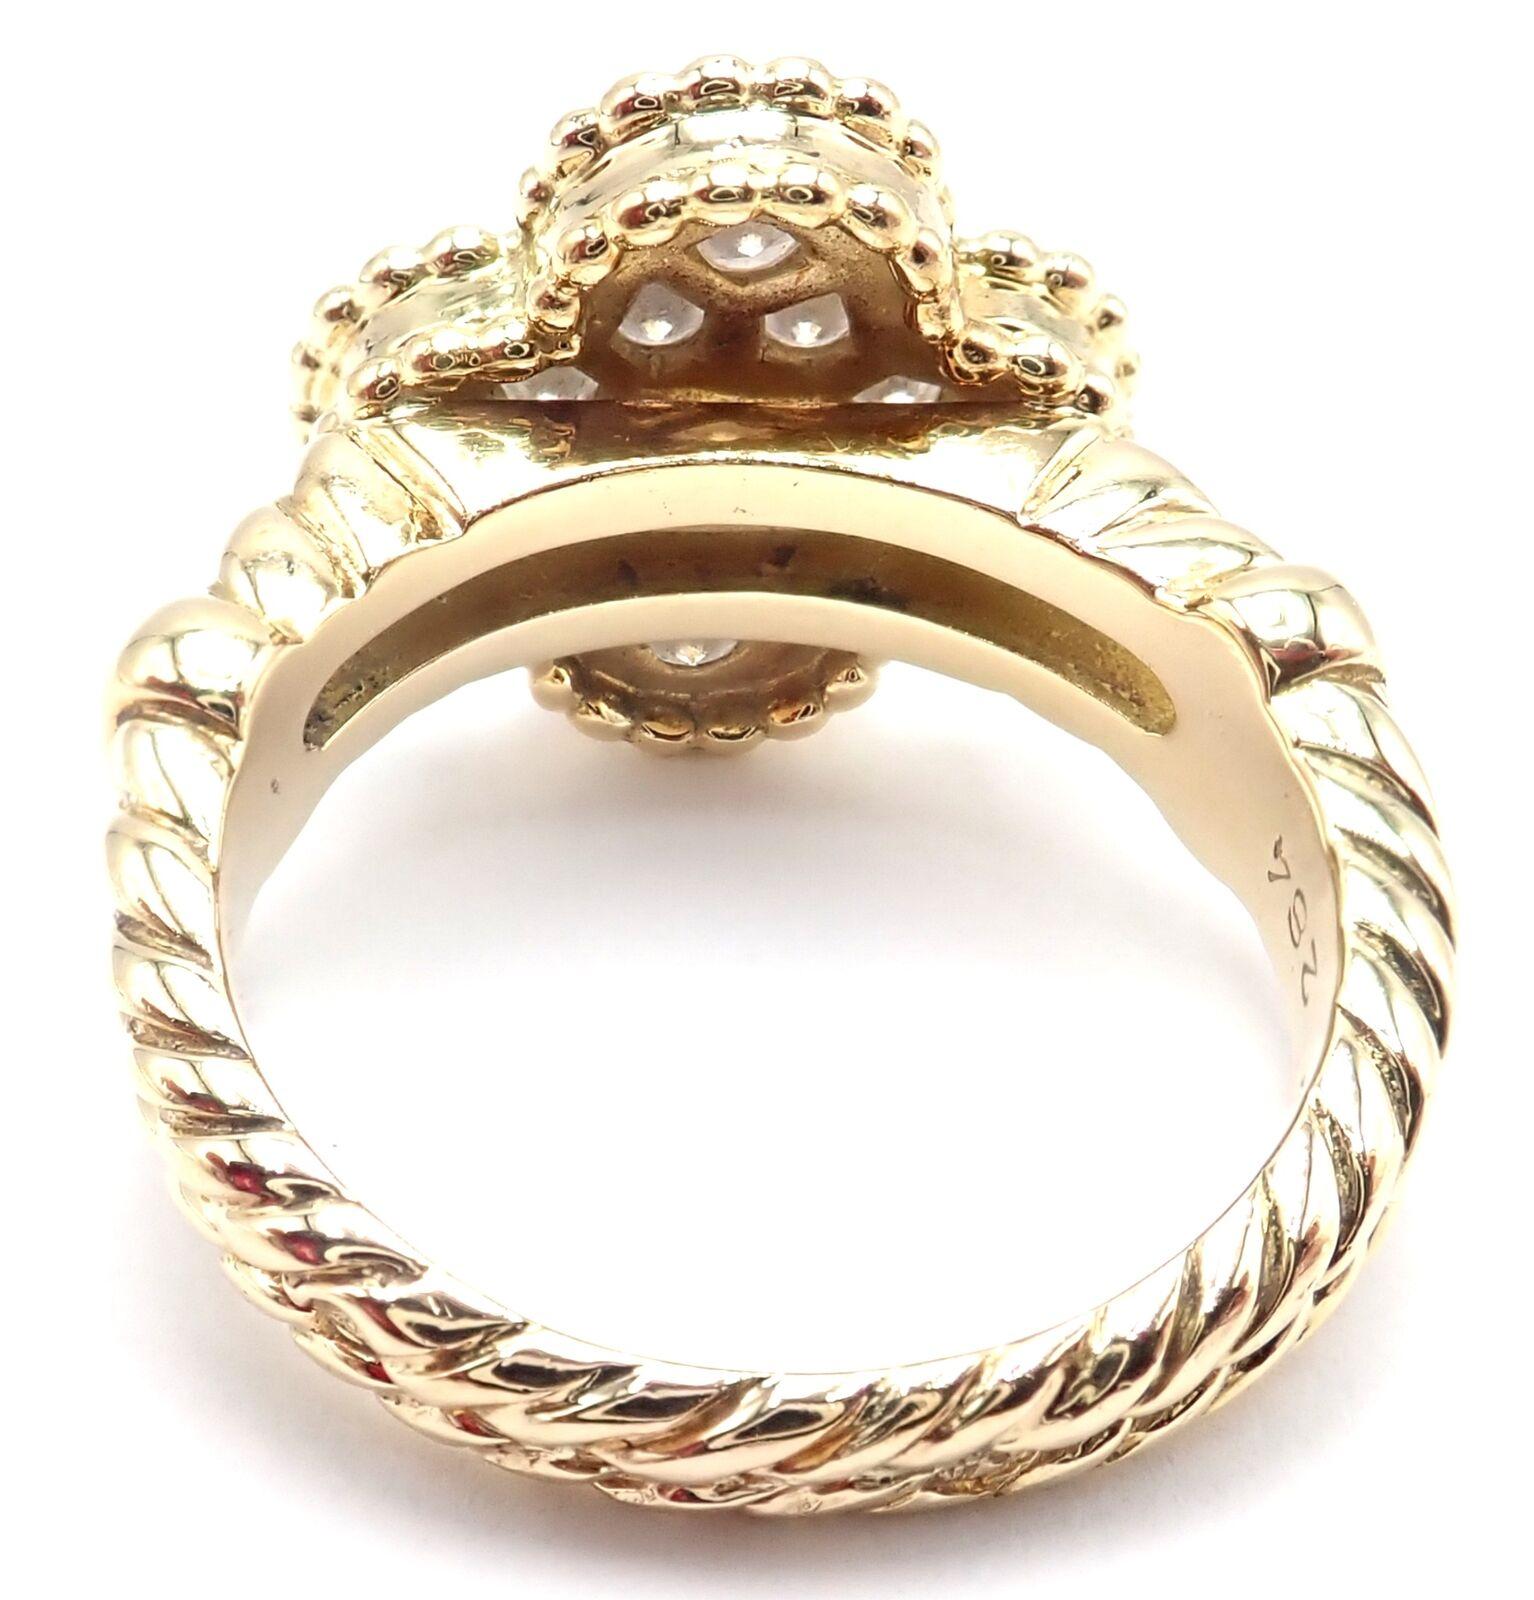 Brilliant Cut Van Cleef & Arpels Vintage Alhambra Diamond Yellow Gold Ring For Sale